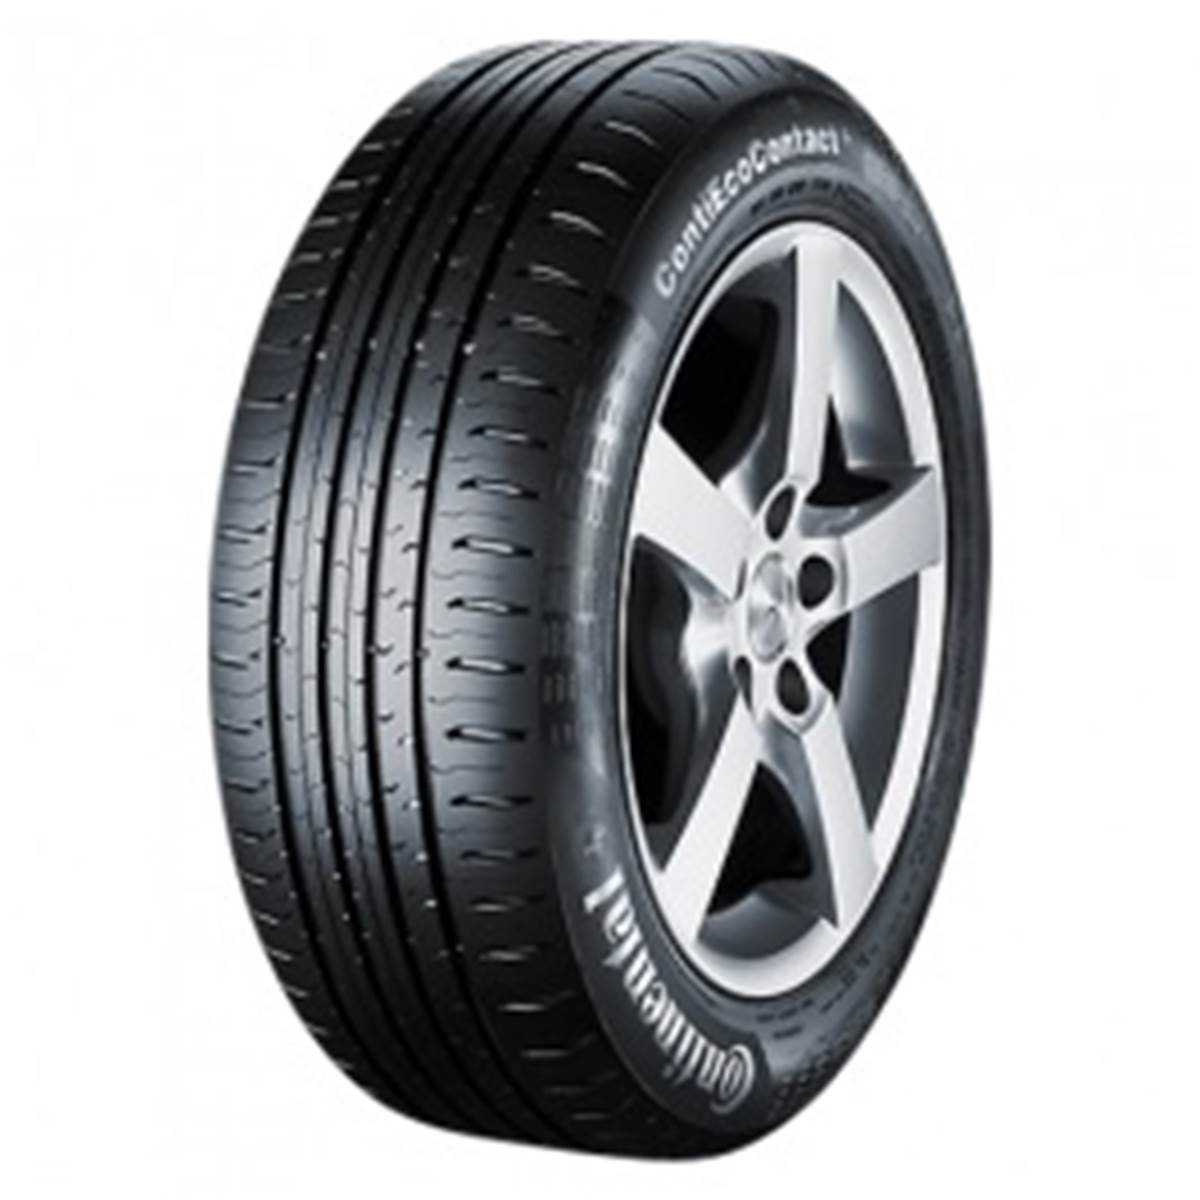 Continental Neumático  Ecocontact 6 155/80R13 79T